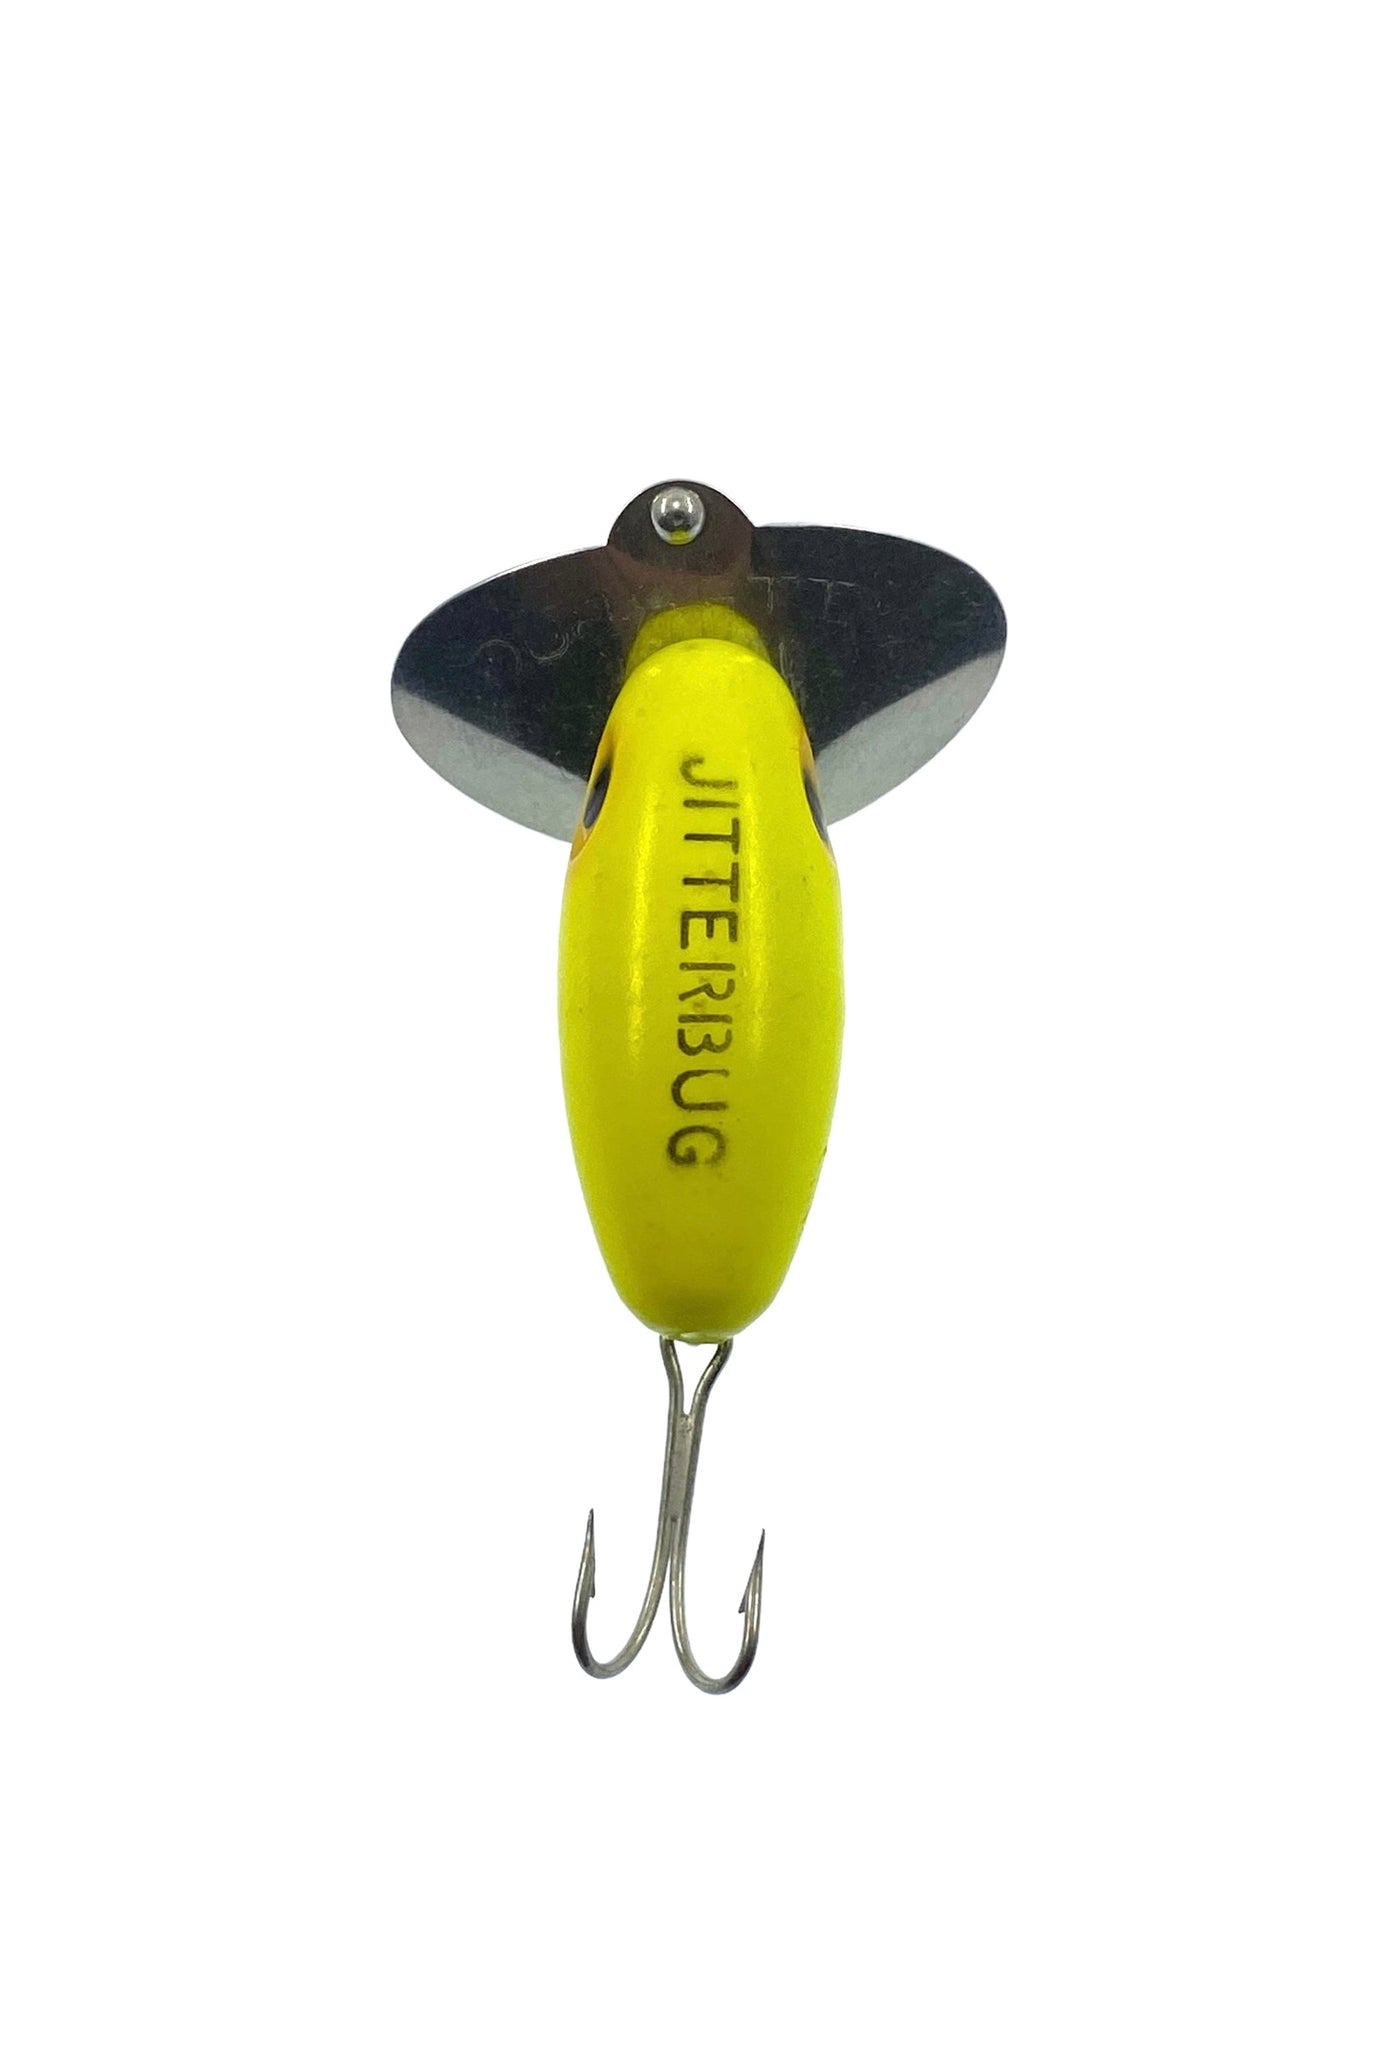 https://toadtackle.net/cdn/shop/products/image_ace8c756-80ad-4fde-bef5-79601e0d1930_1024x1024@2x.jpg?v=1676945433